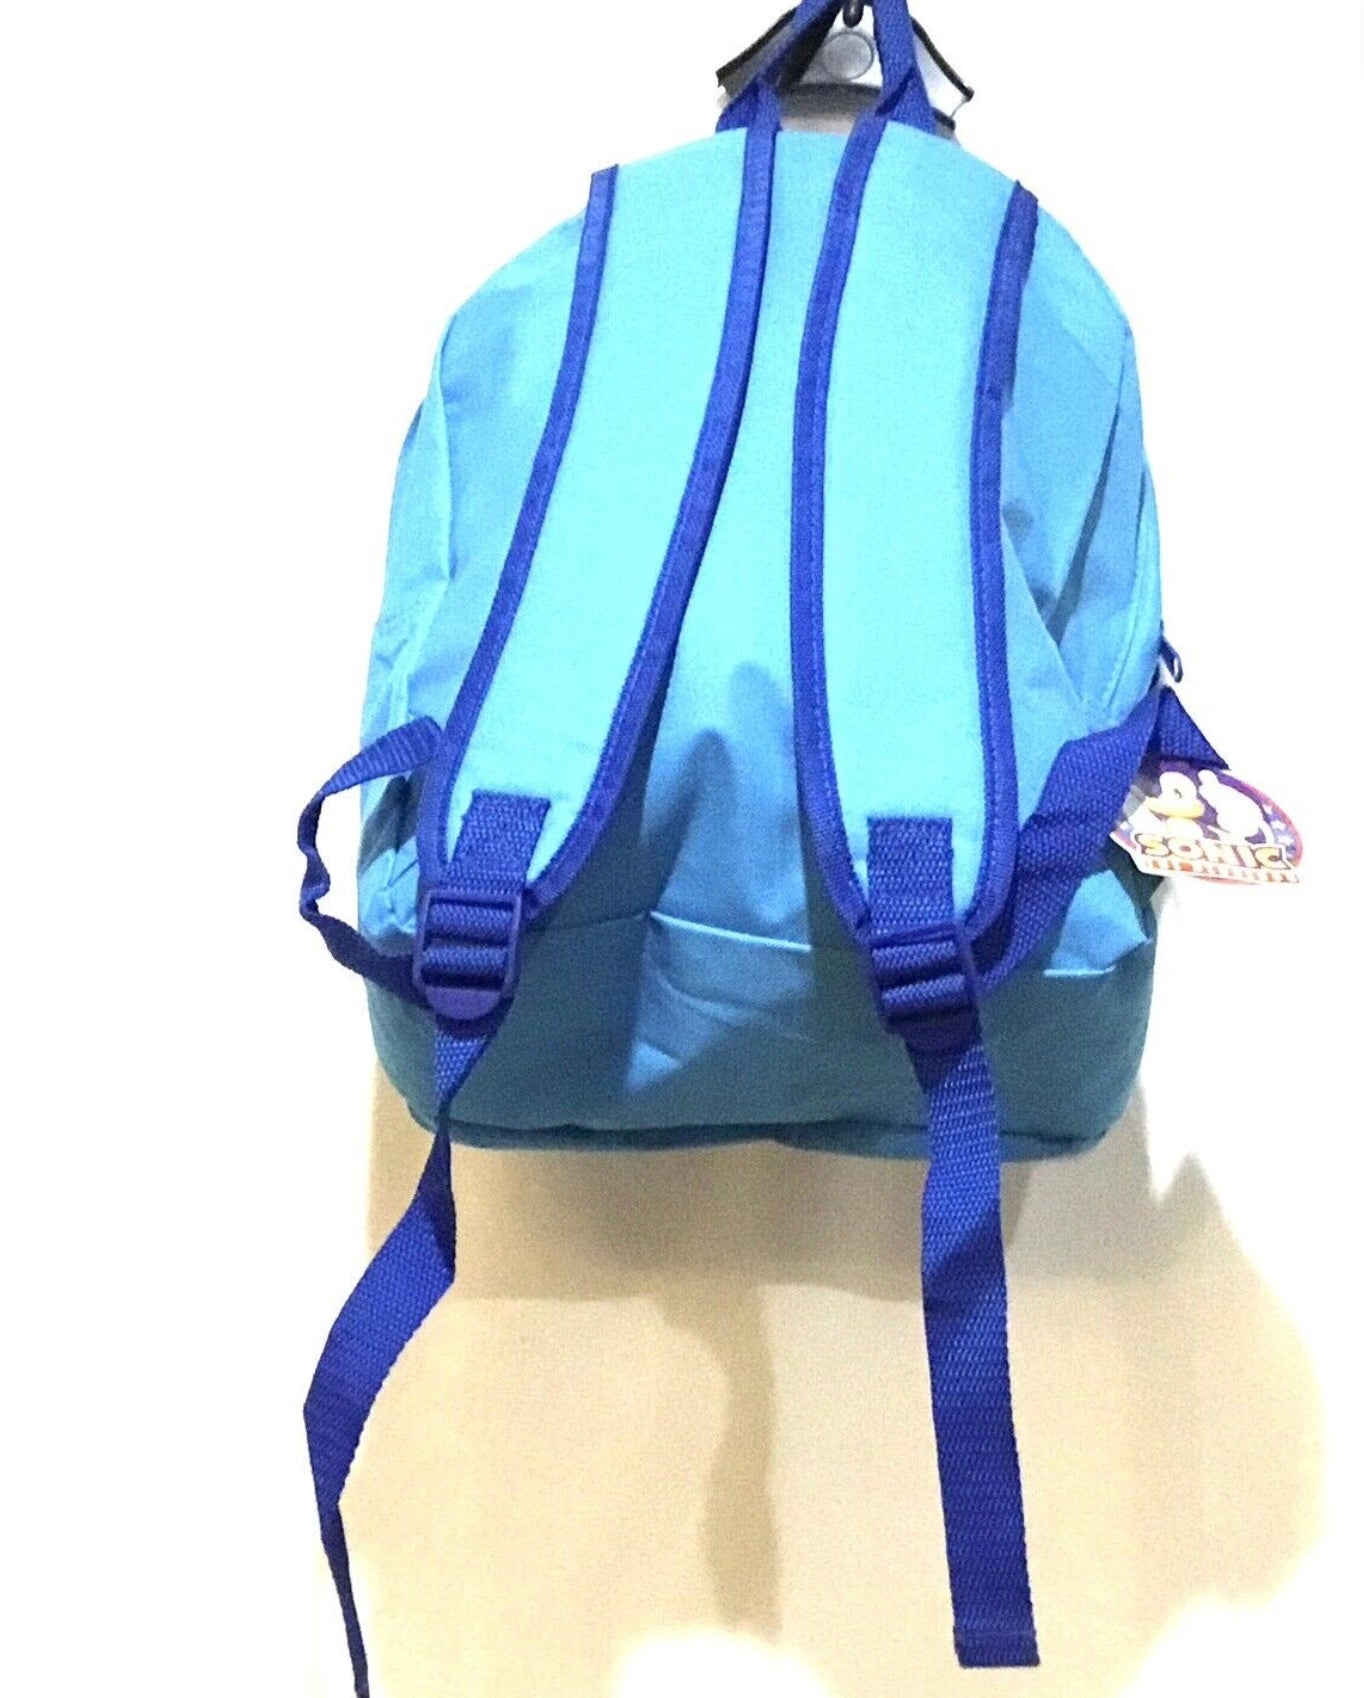 SONIC THE HEDGEHOG BACKPACK SCHOOL BAG RARE TO GET.